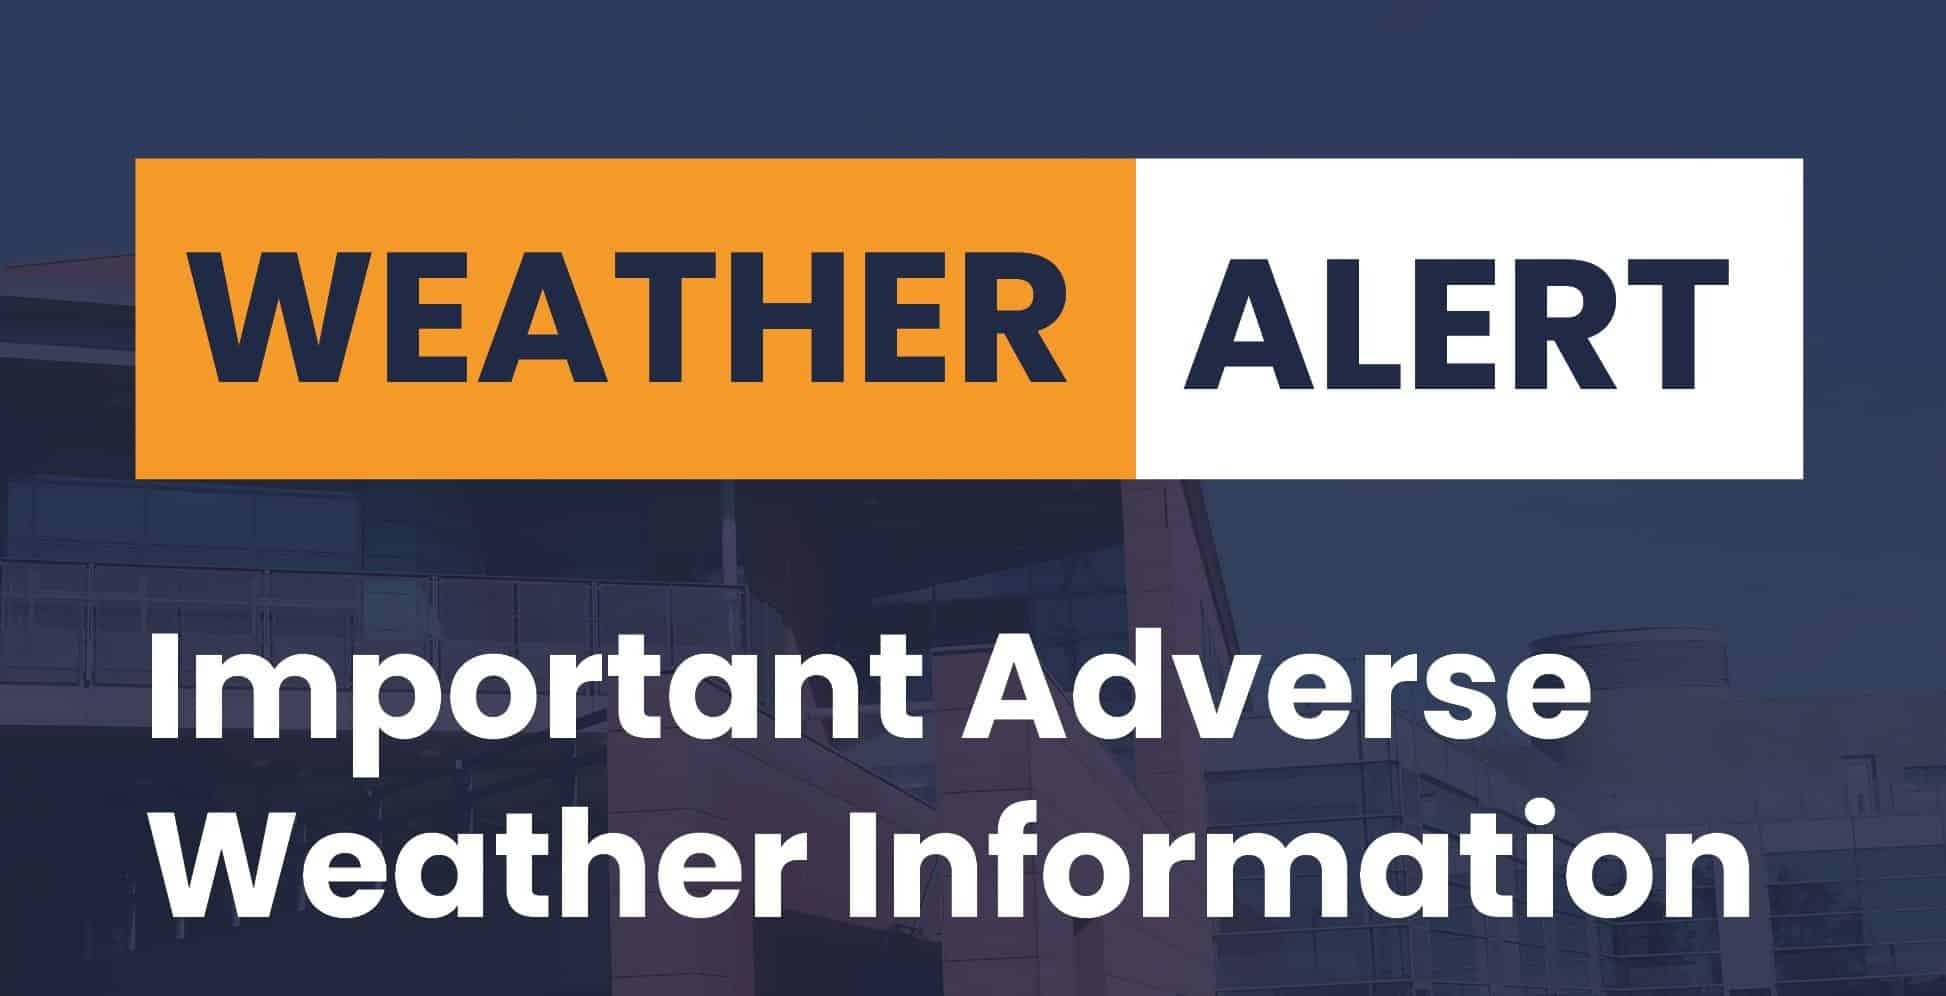 Weather Alert. Important Adverse Weather Information